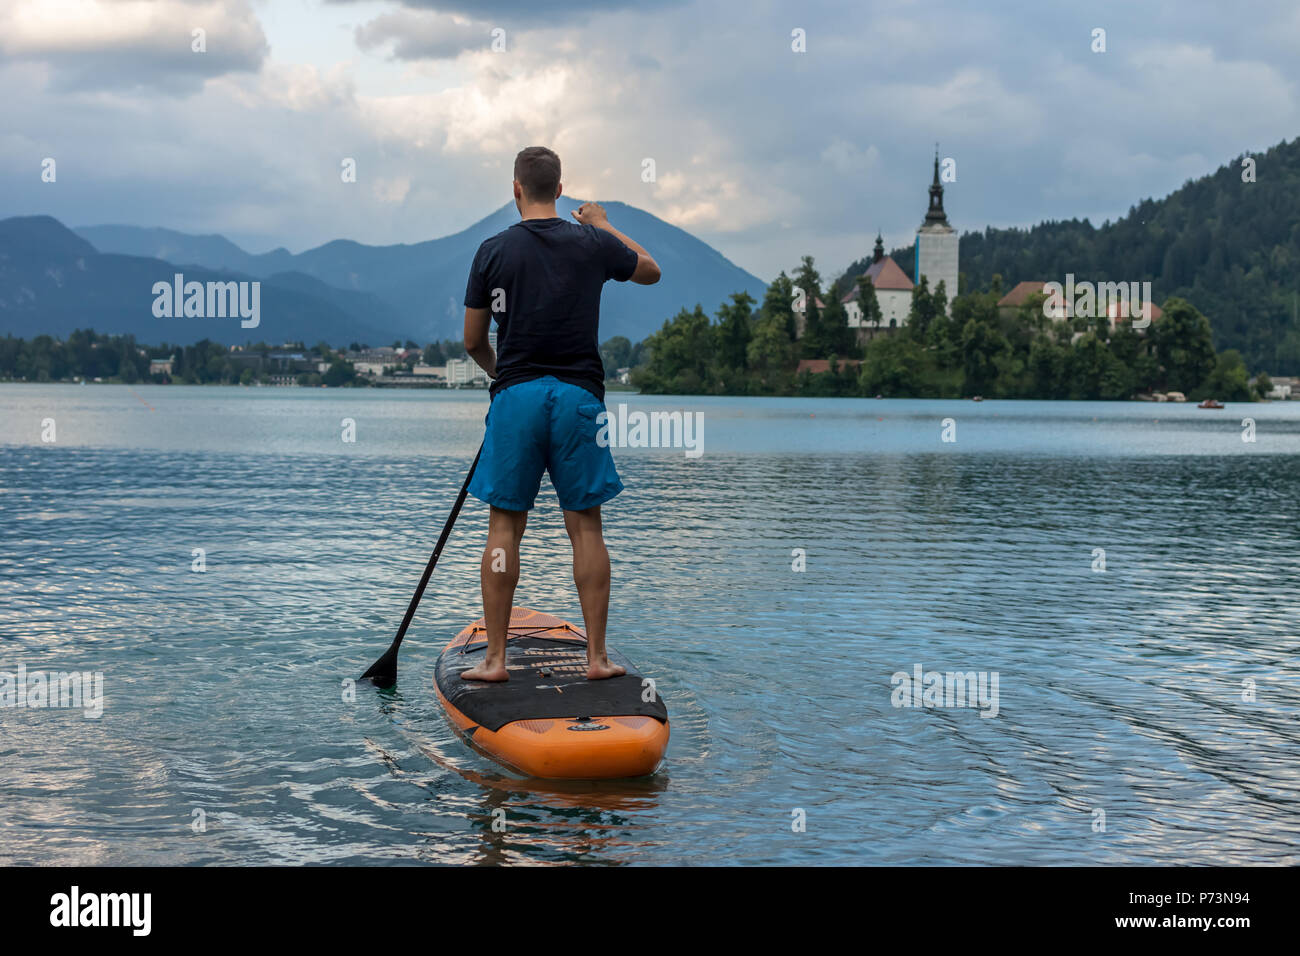 stand up paddle boarding on the lake Stock Photo